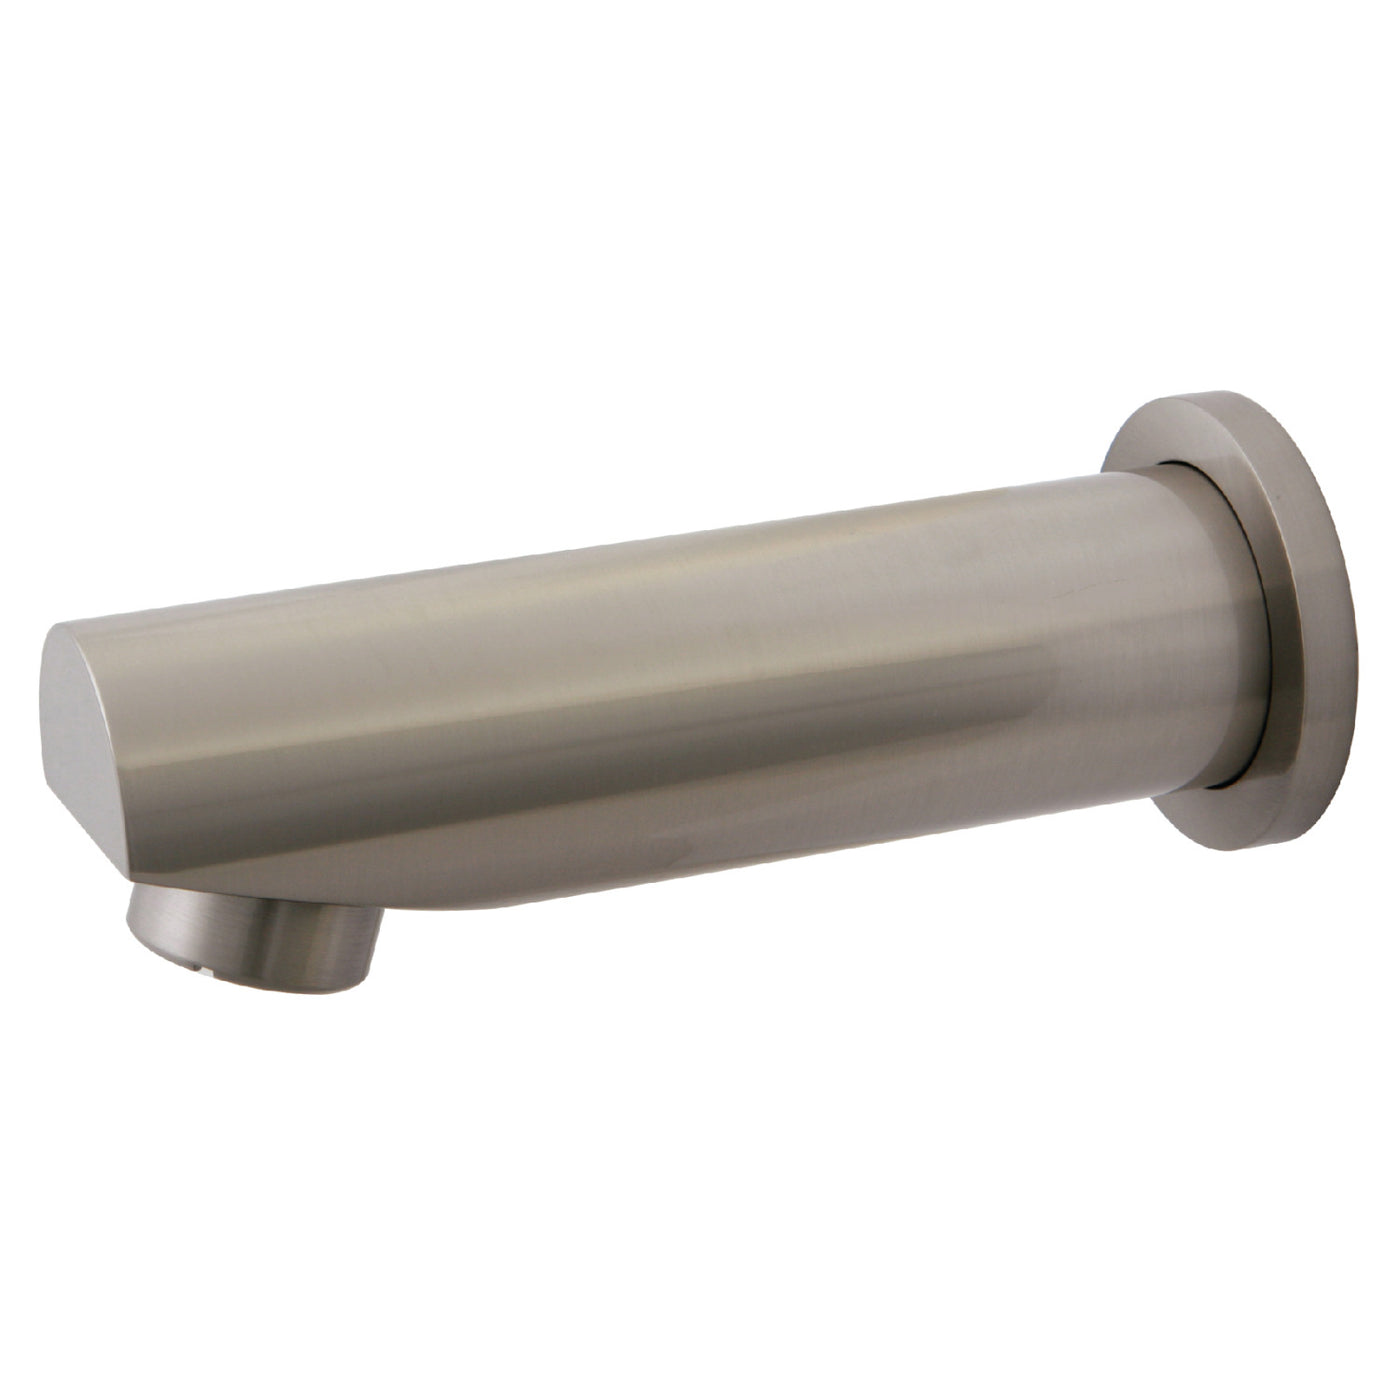 Elements of Design DK8187A8 Tub Faucet Spout with Flange, Brushed Nickel